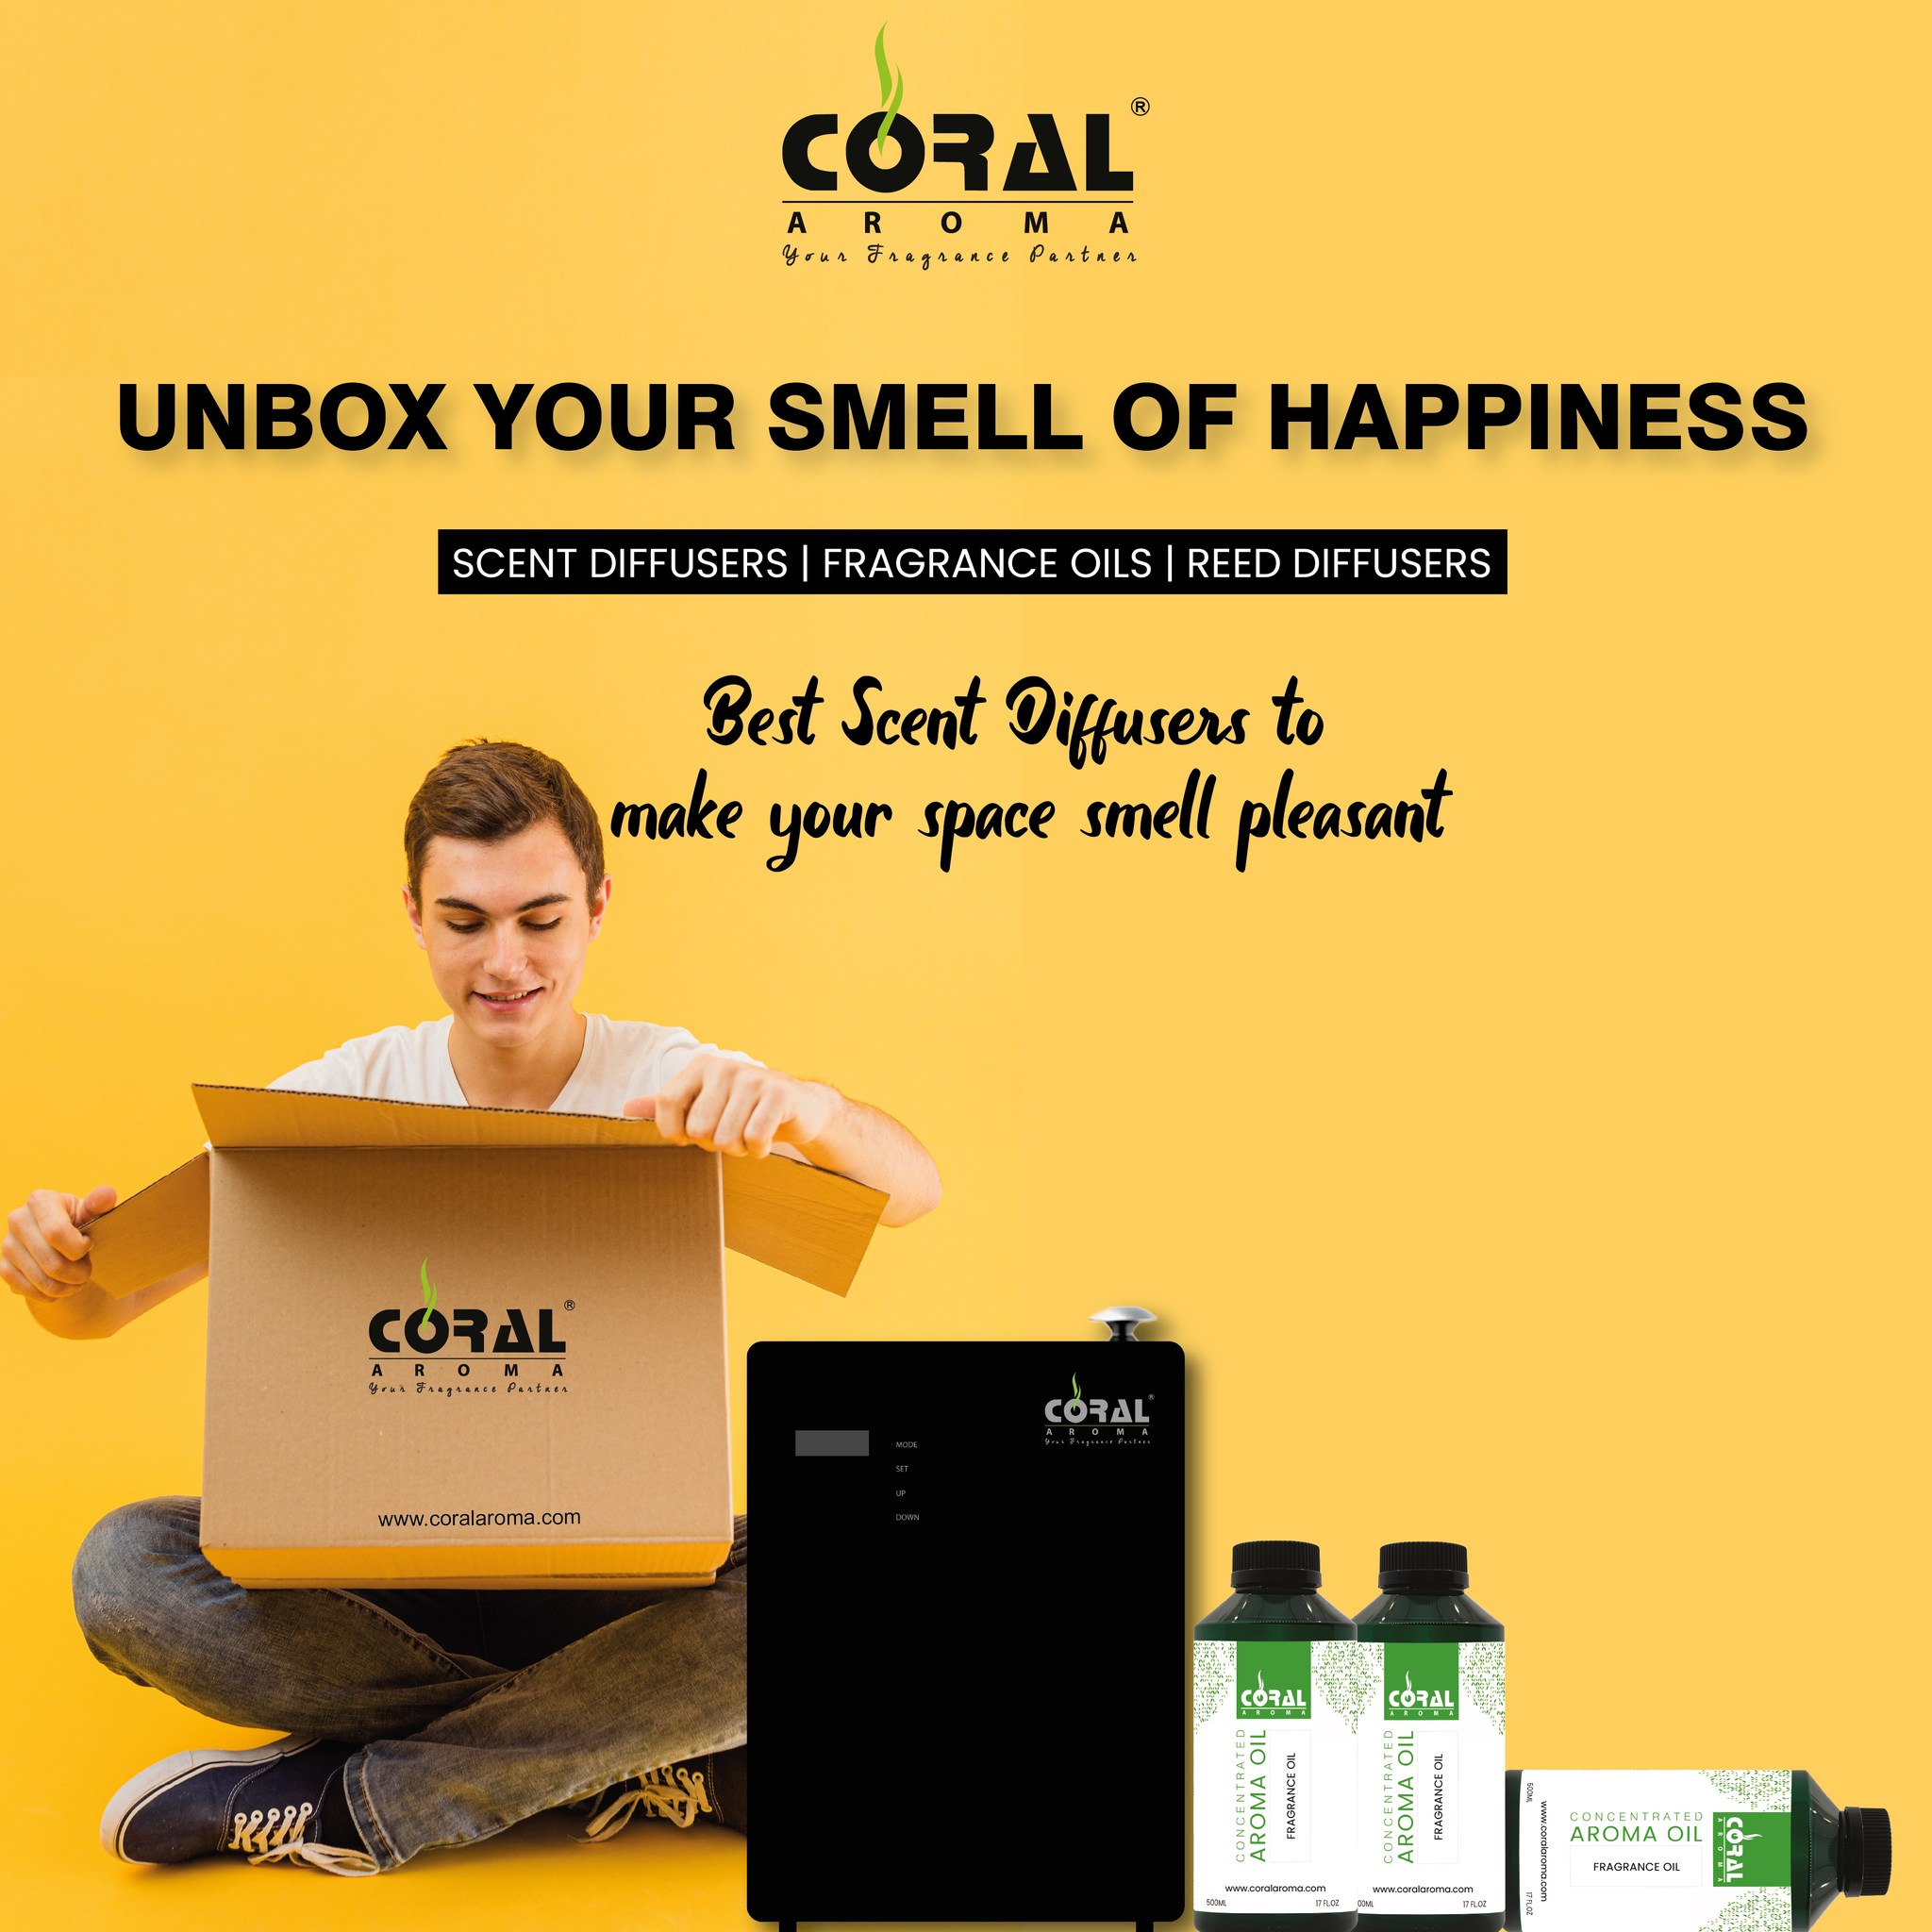 Advanced Scent Diffuser & Premium Fragrance oils for your lovely space. Head towards our website to explore more products.

SHOP NOW: https://www.coralaroma.com/

#scentdiffuser #fragranceoil #coralaroma #uae